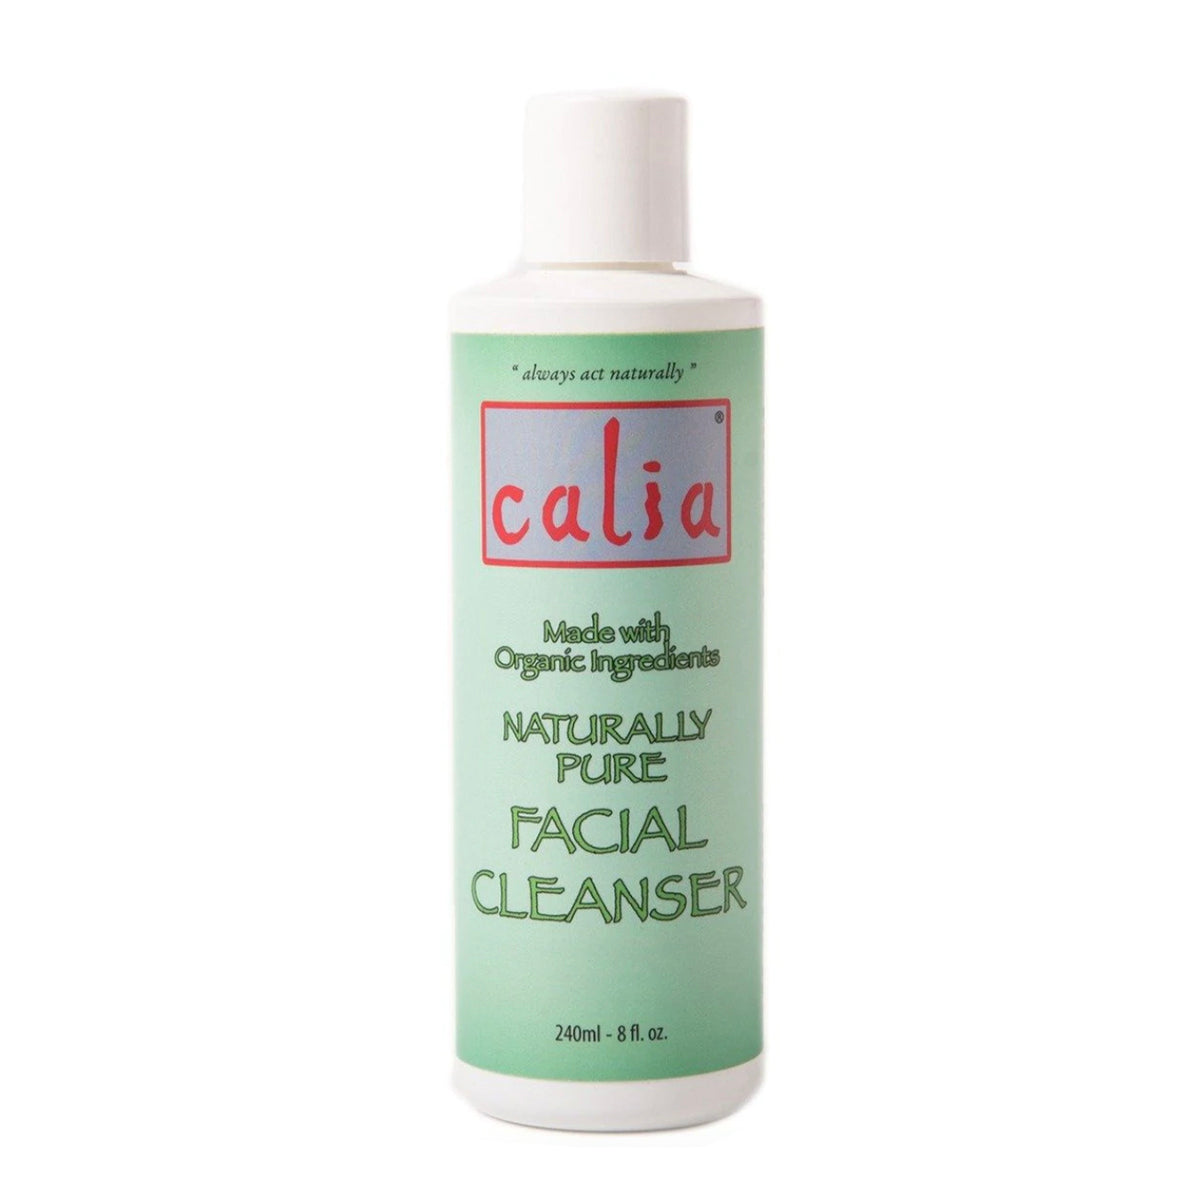 naturally pure facial cleanser 240ml